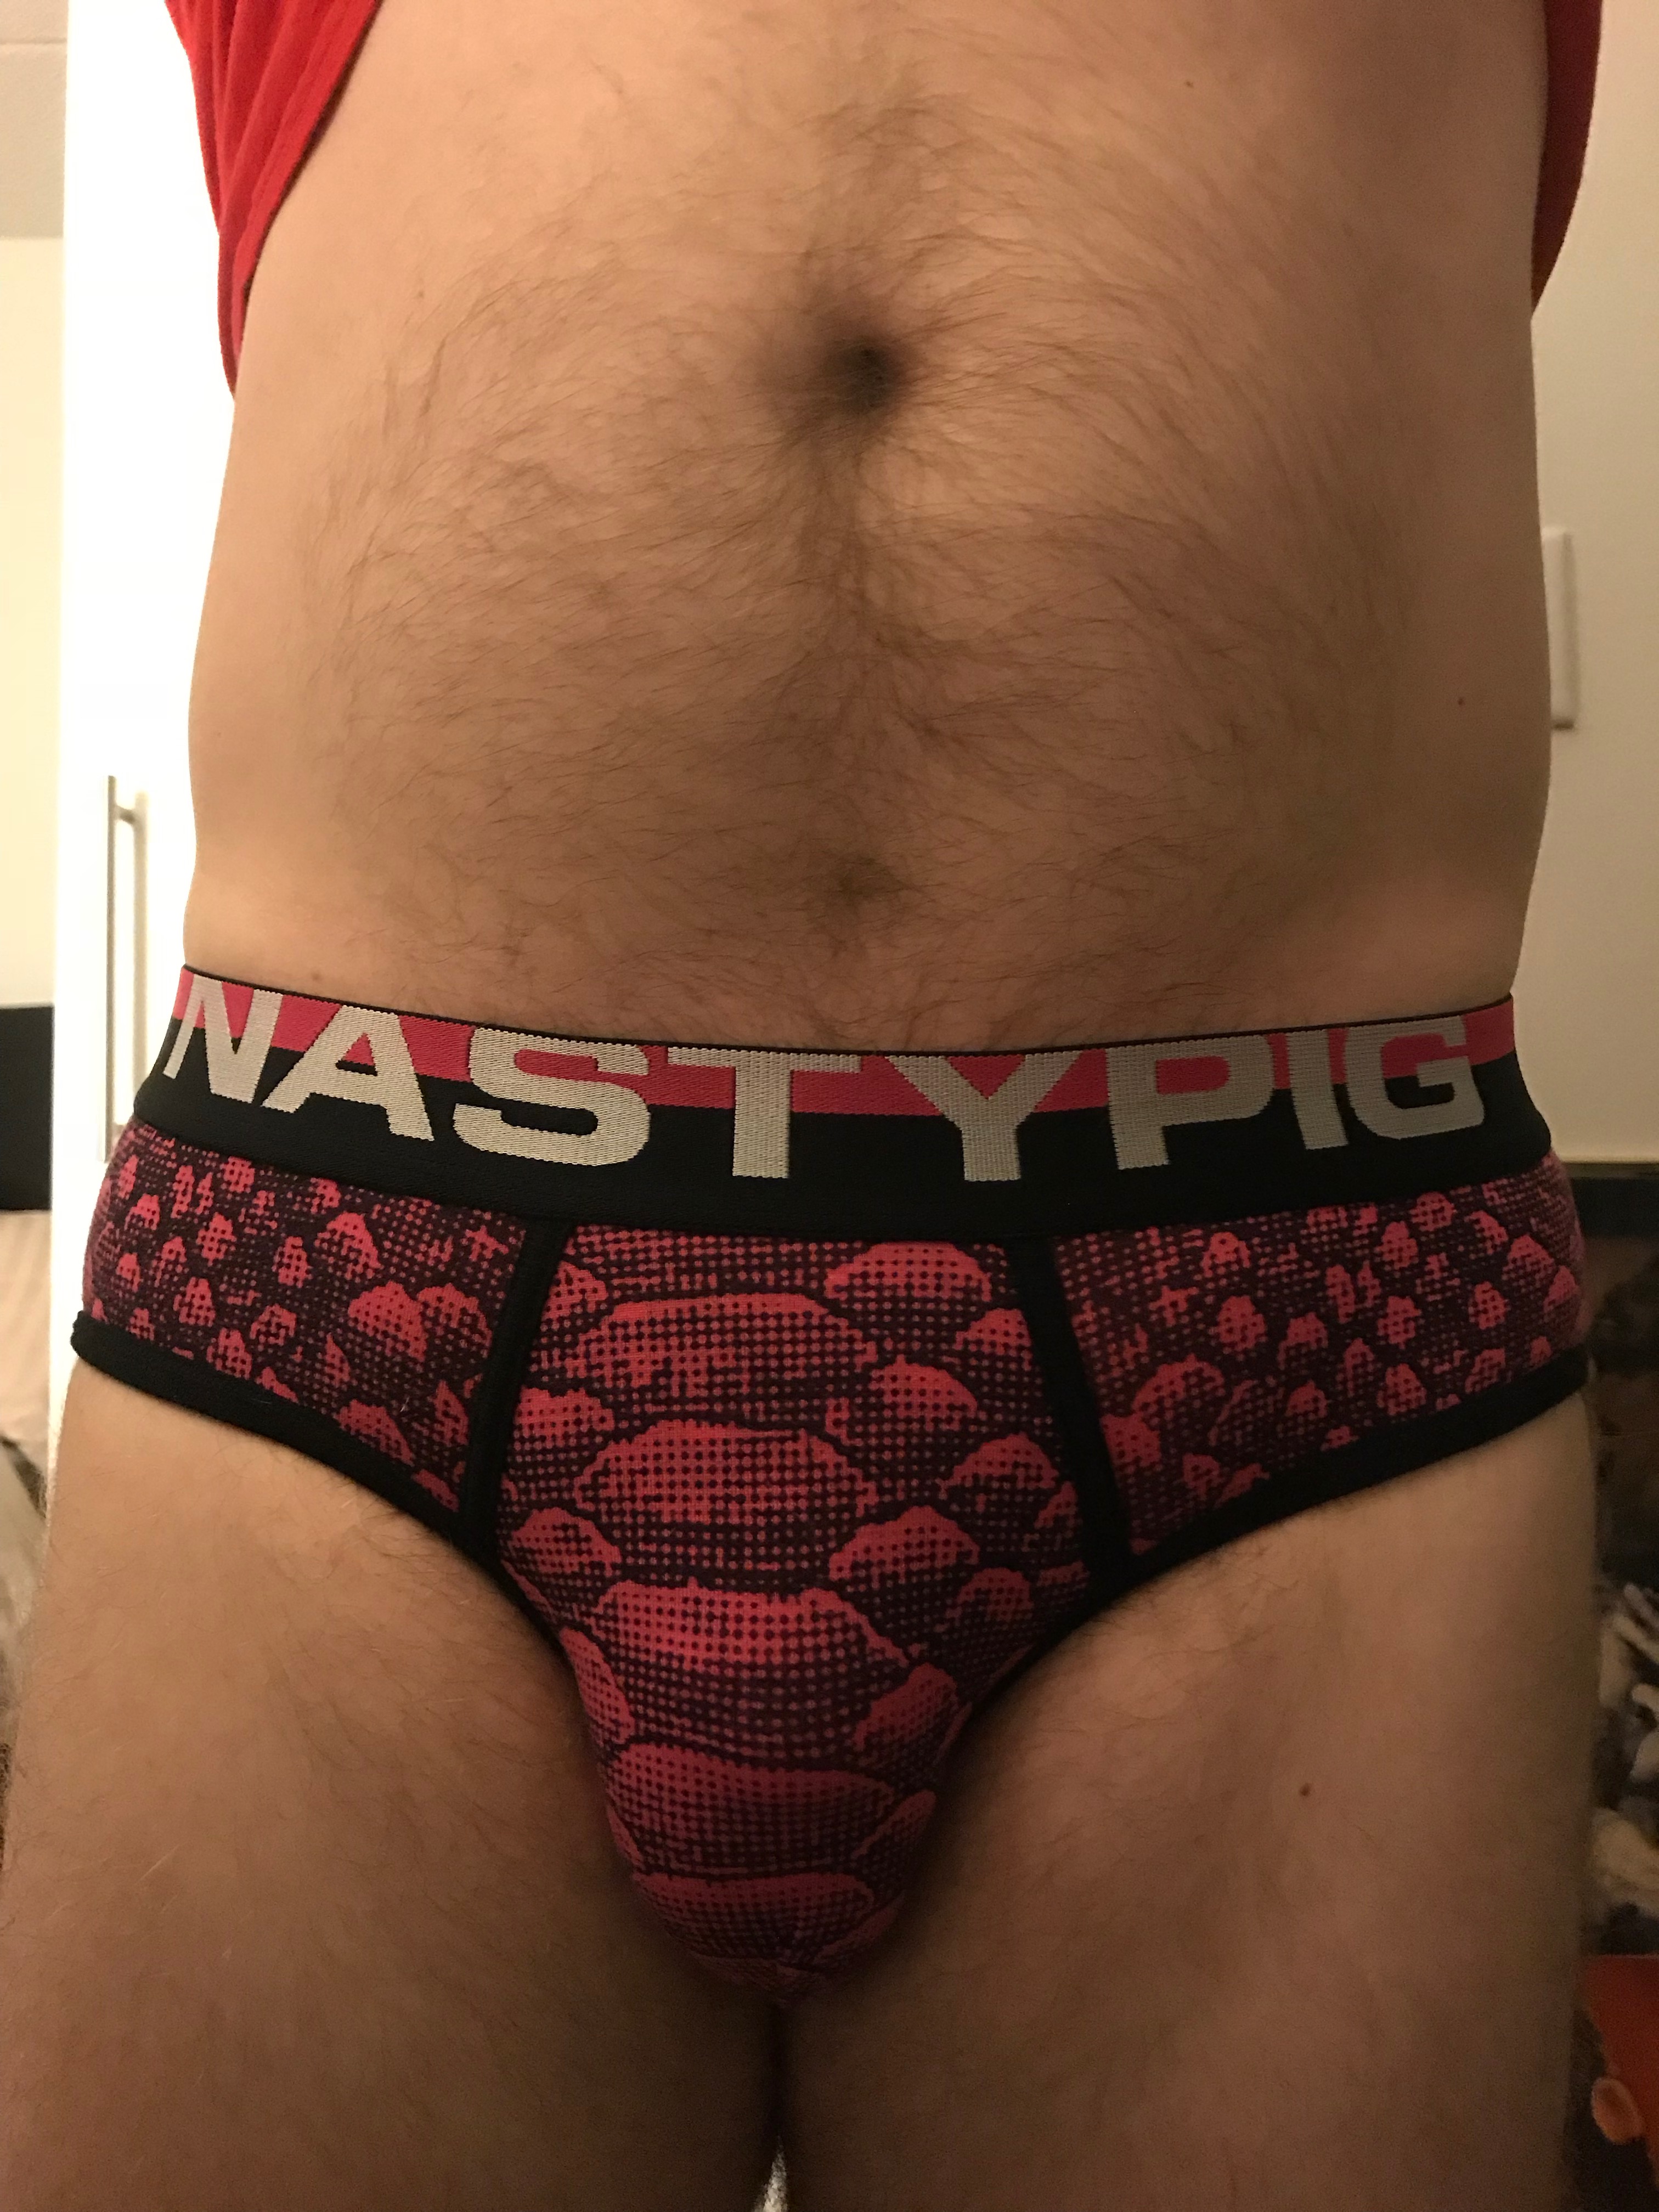 Nasty Pig in pink and other tales from the weekend…